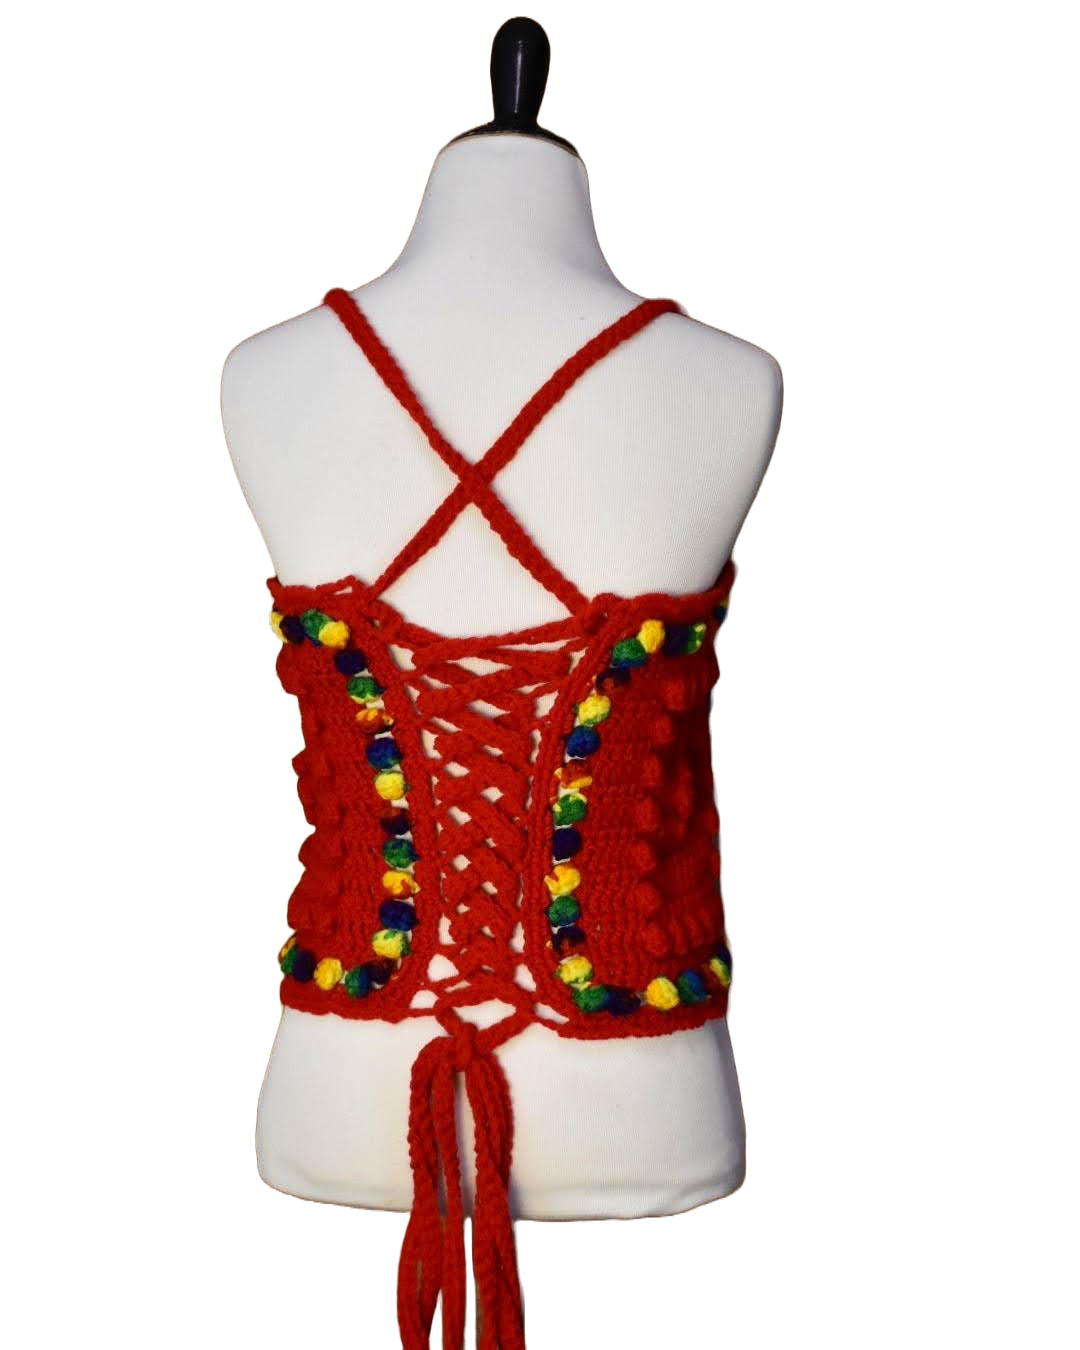 Back view of music festival crochet top with lace-up back closure.